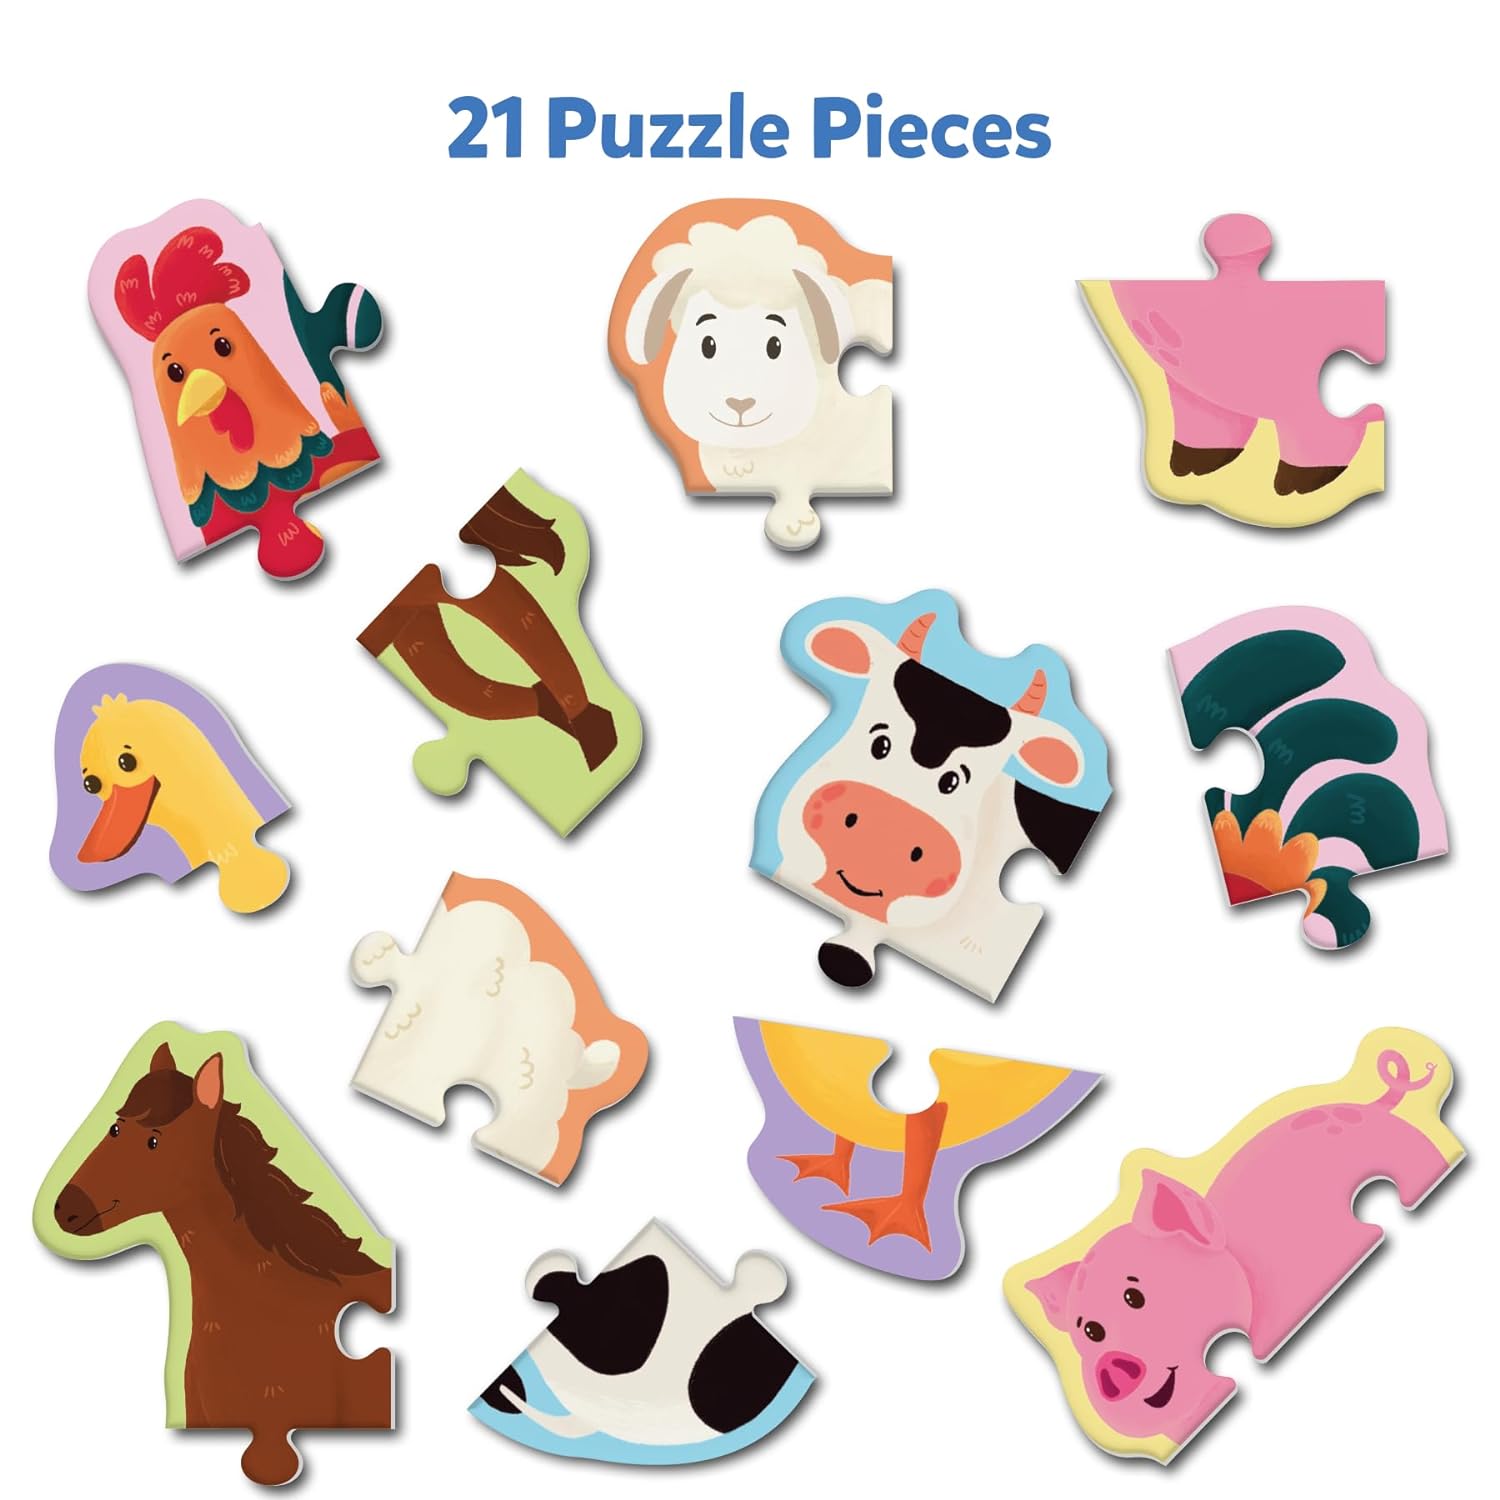 Skillmatics My First Puzzle Set - 21 Piece Farm Animal Jigsaw Puzzles,  Educational Toddler Toy for Kids